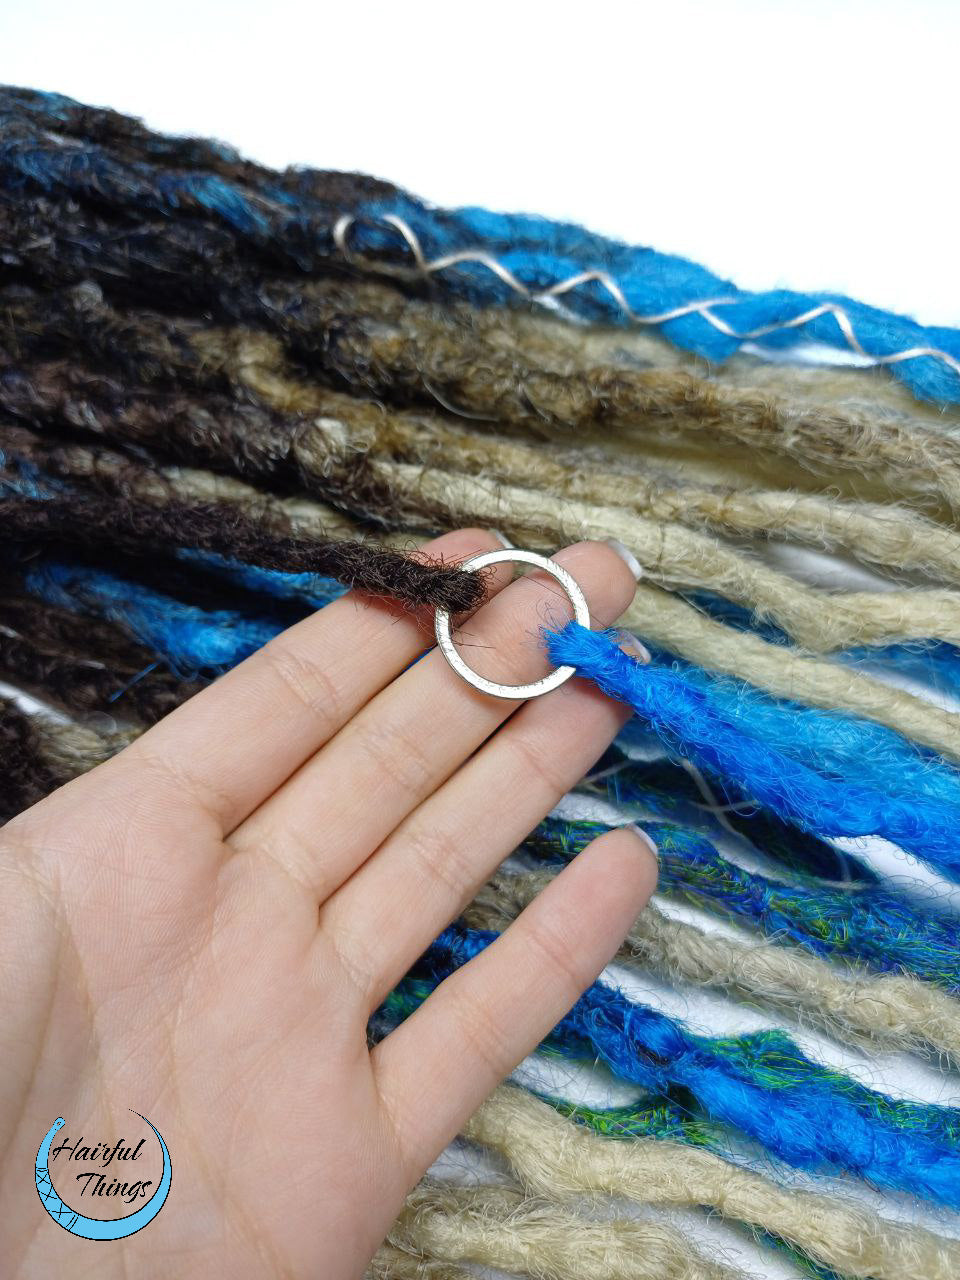 Textured dreads set ombre brown-to-blonde and blue